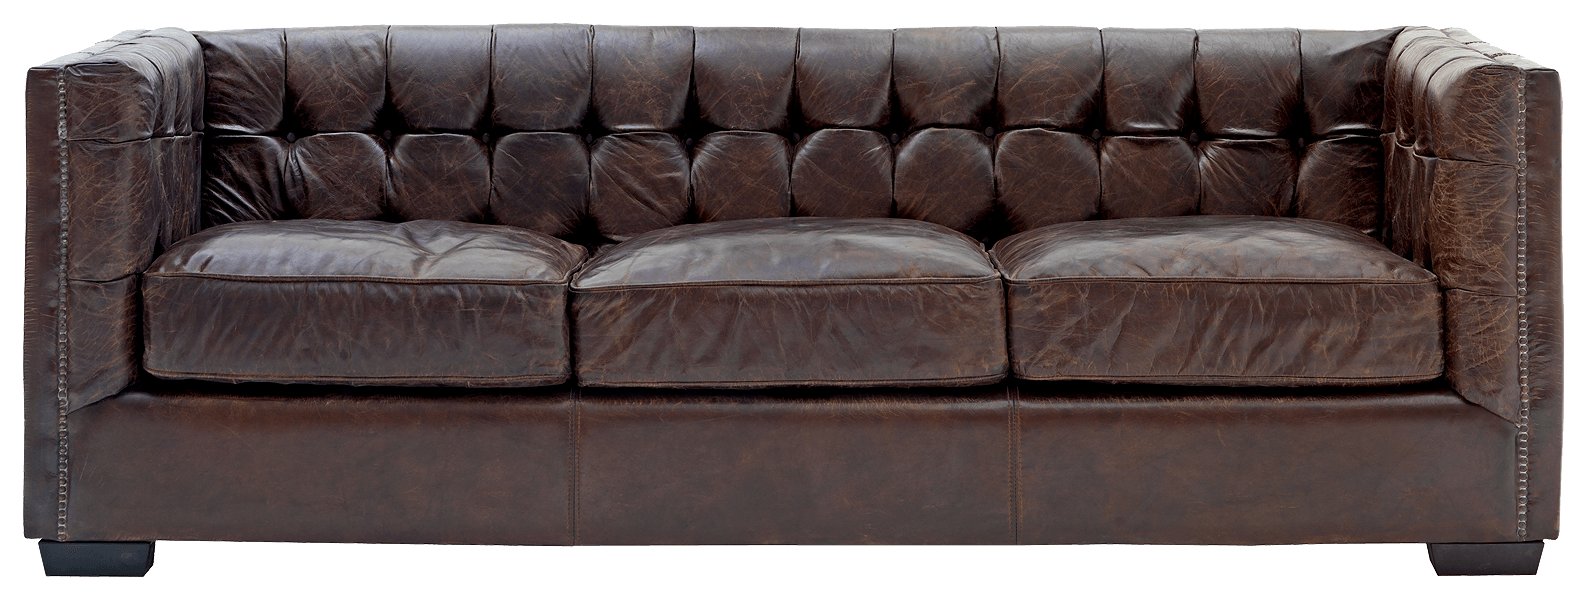 Chesterfield Sofa PNG Photos